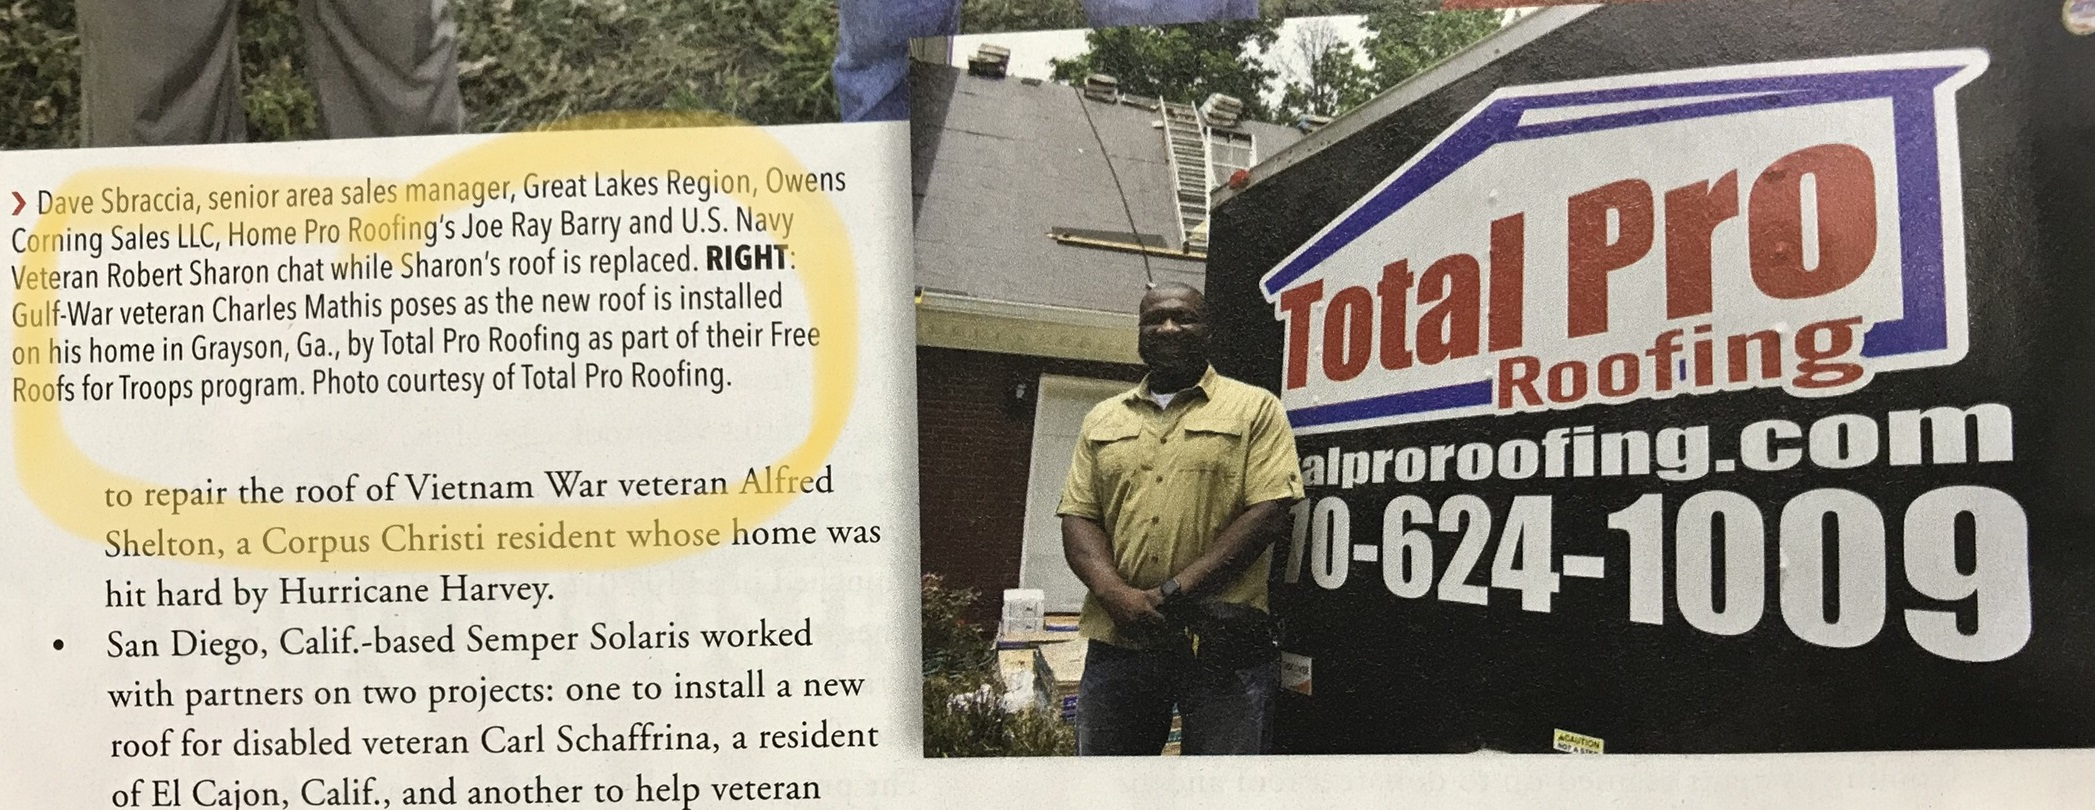 Total Pro Roofing - Roofing Contractor Magazine November 2018